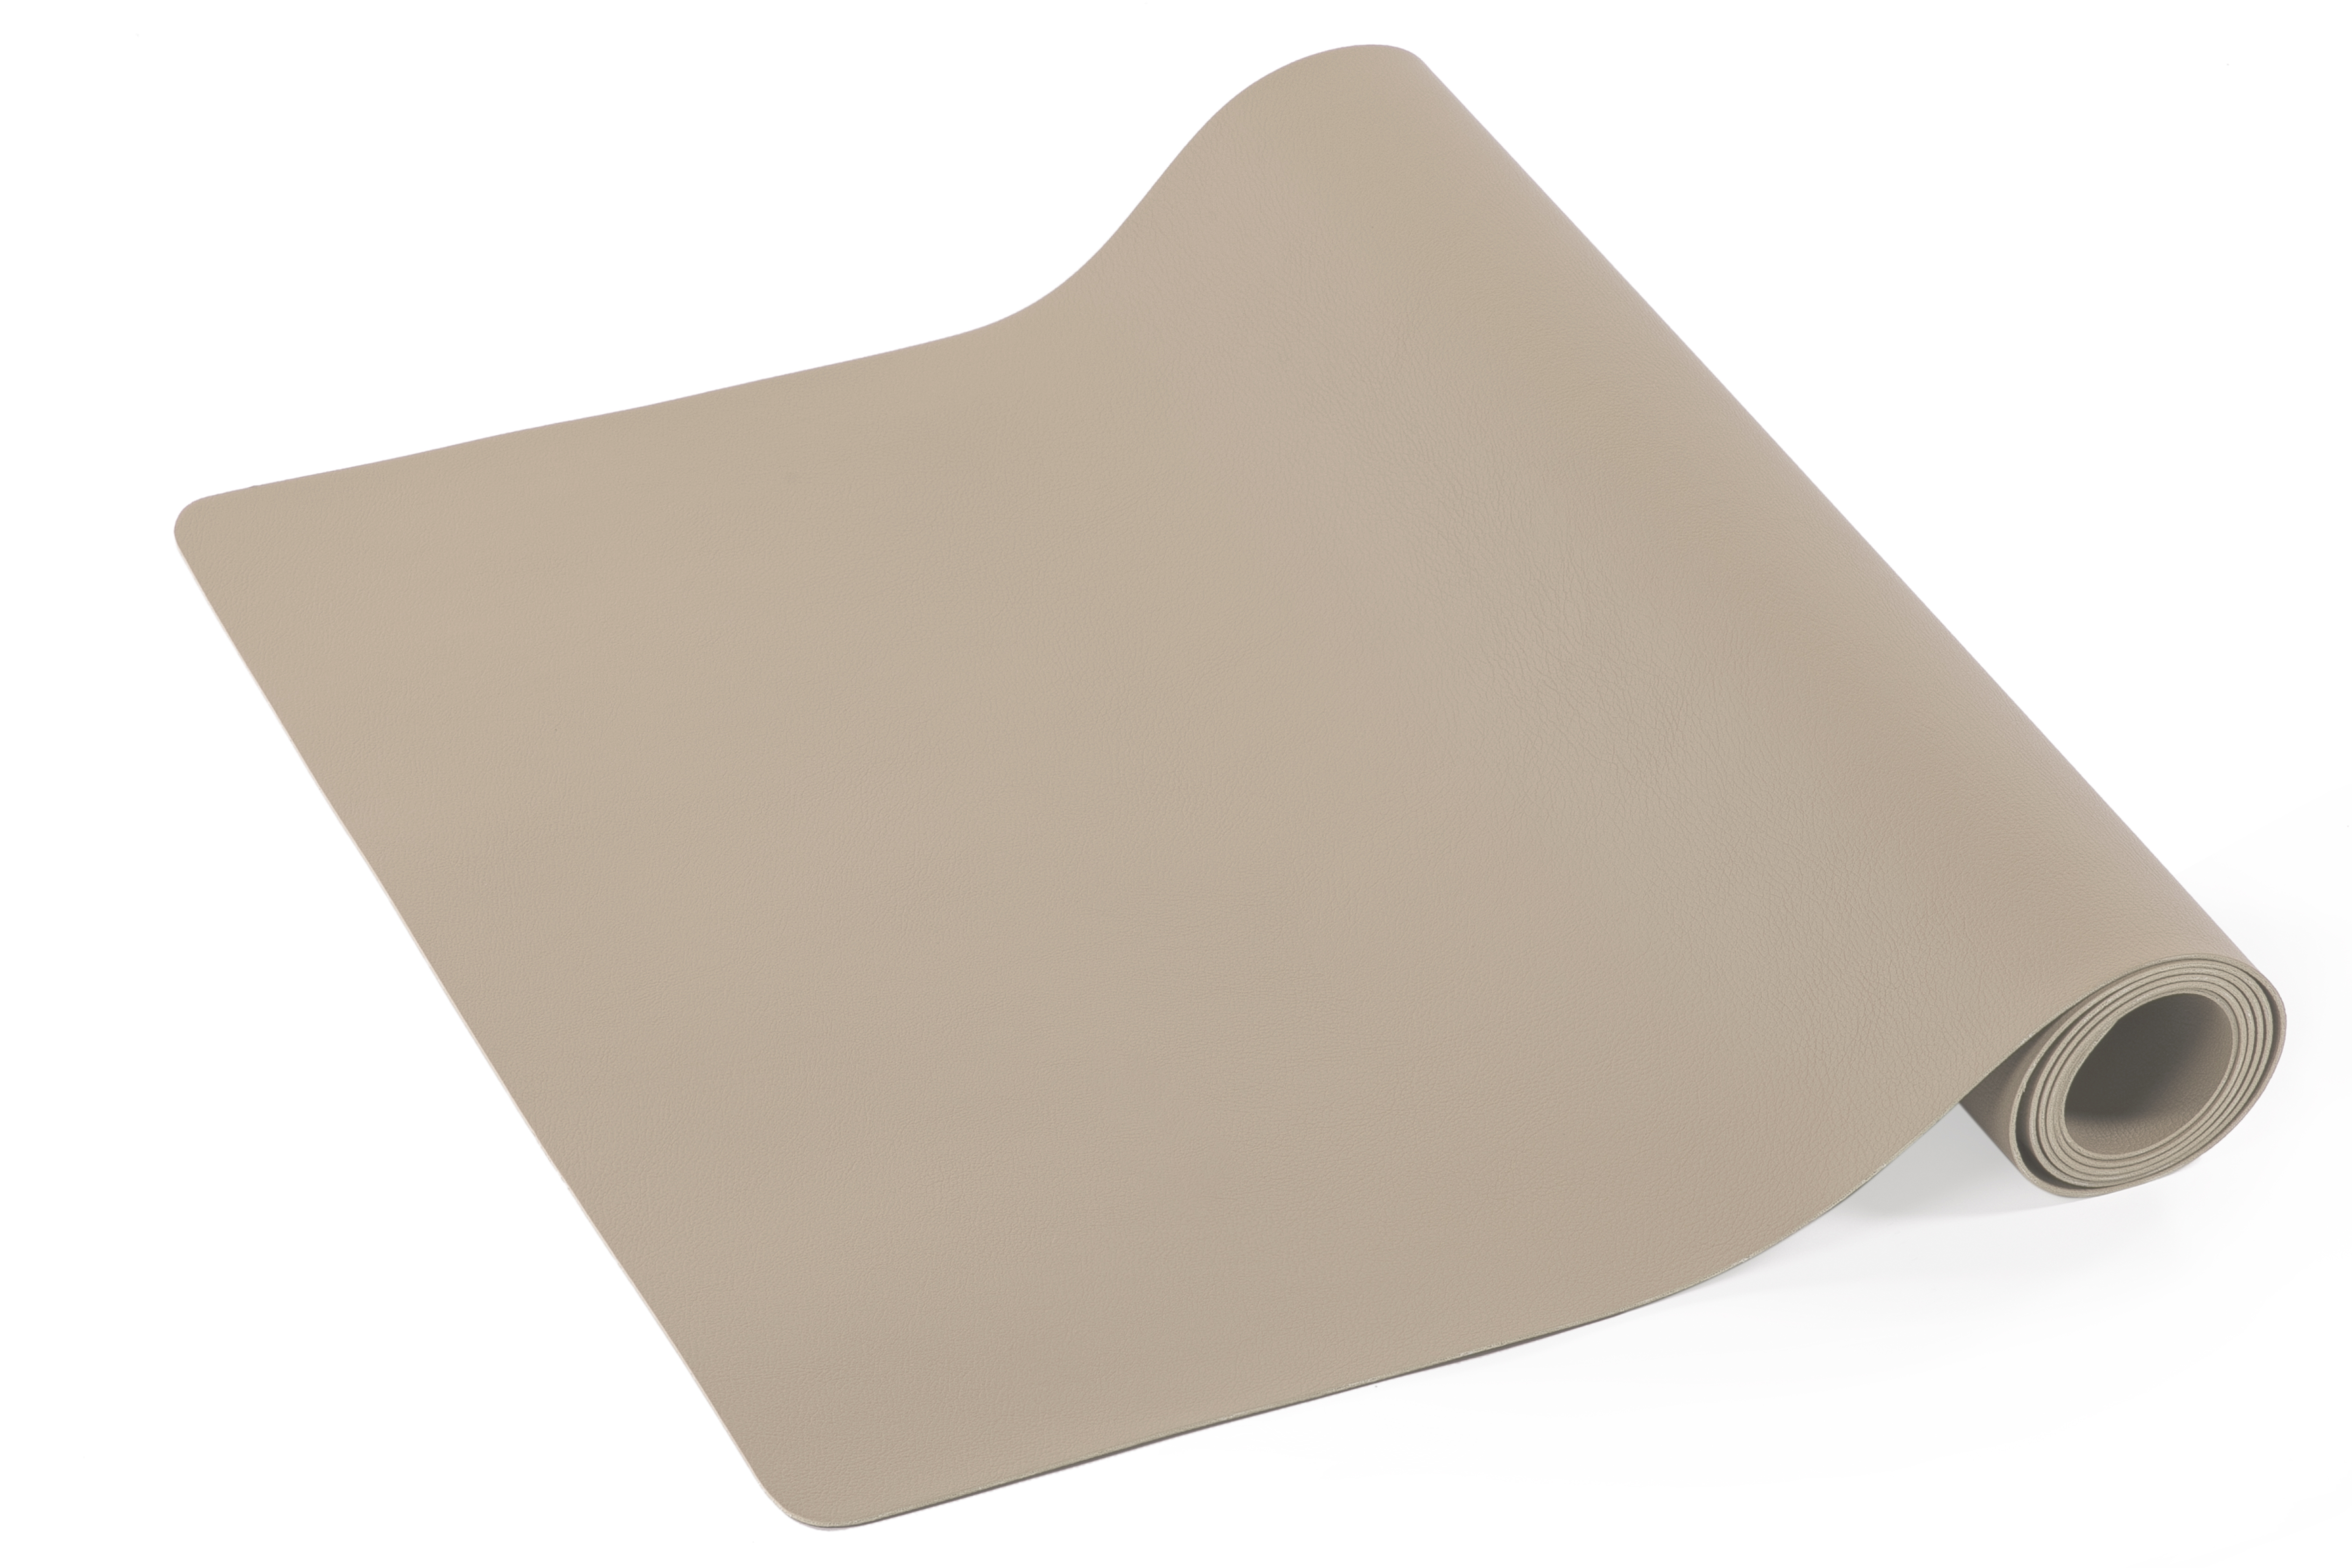 Table runner - Leather look imitation - 45X145cm, taupe